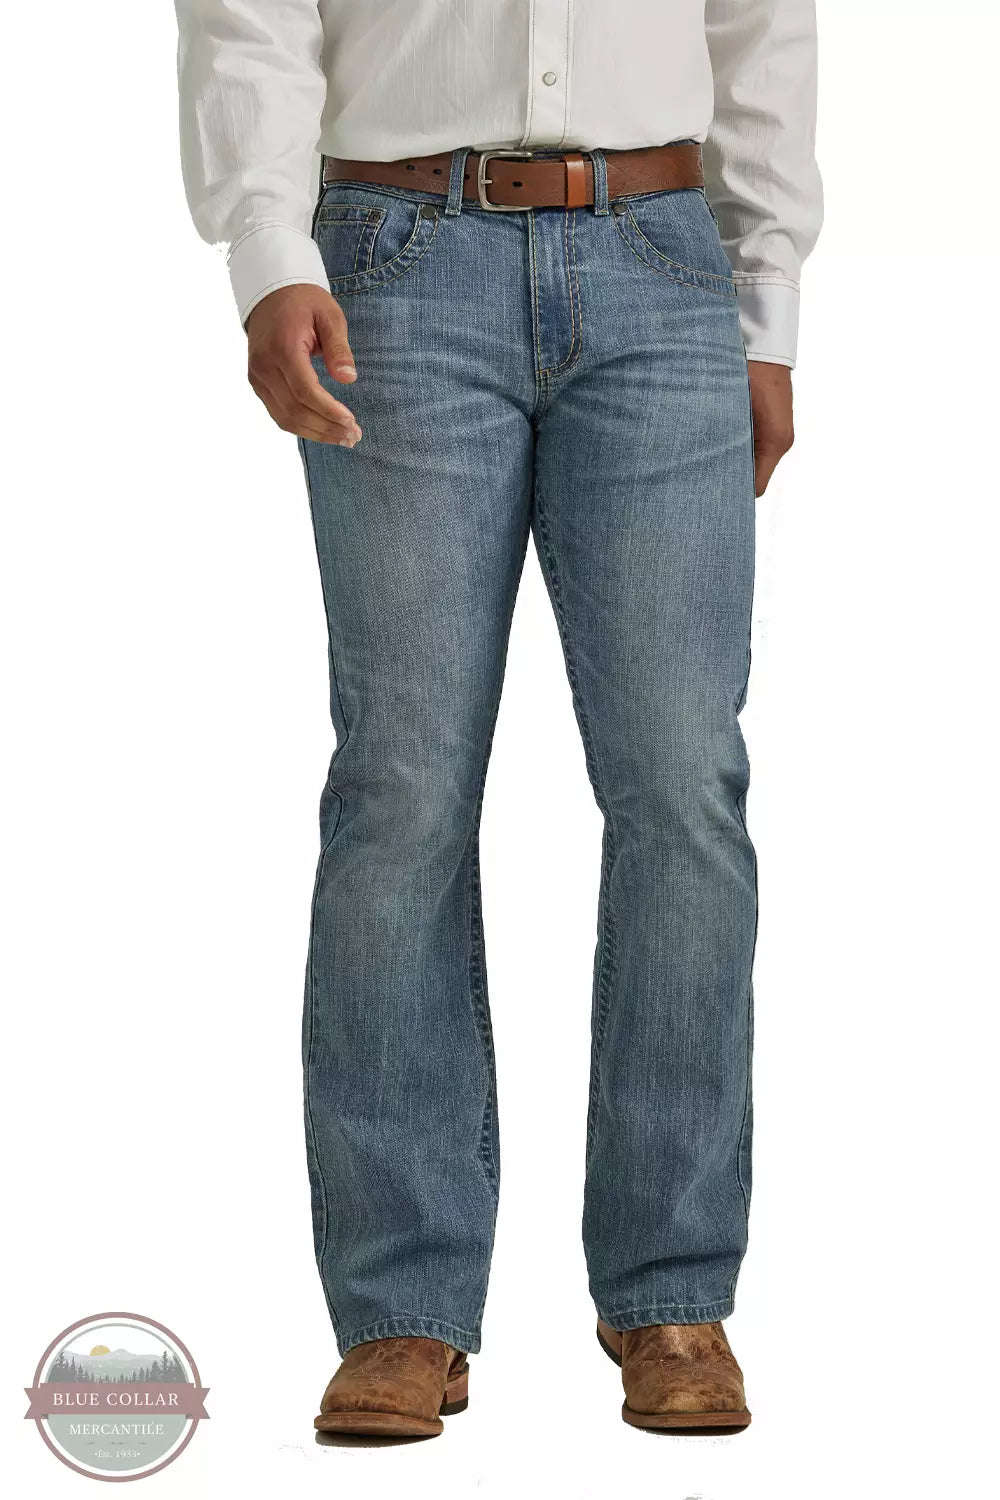 Wrangler 112338550 Rock 47 Slim Fit Bootcut Jeans in Roundabout Front View